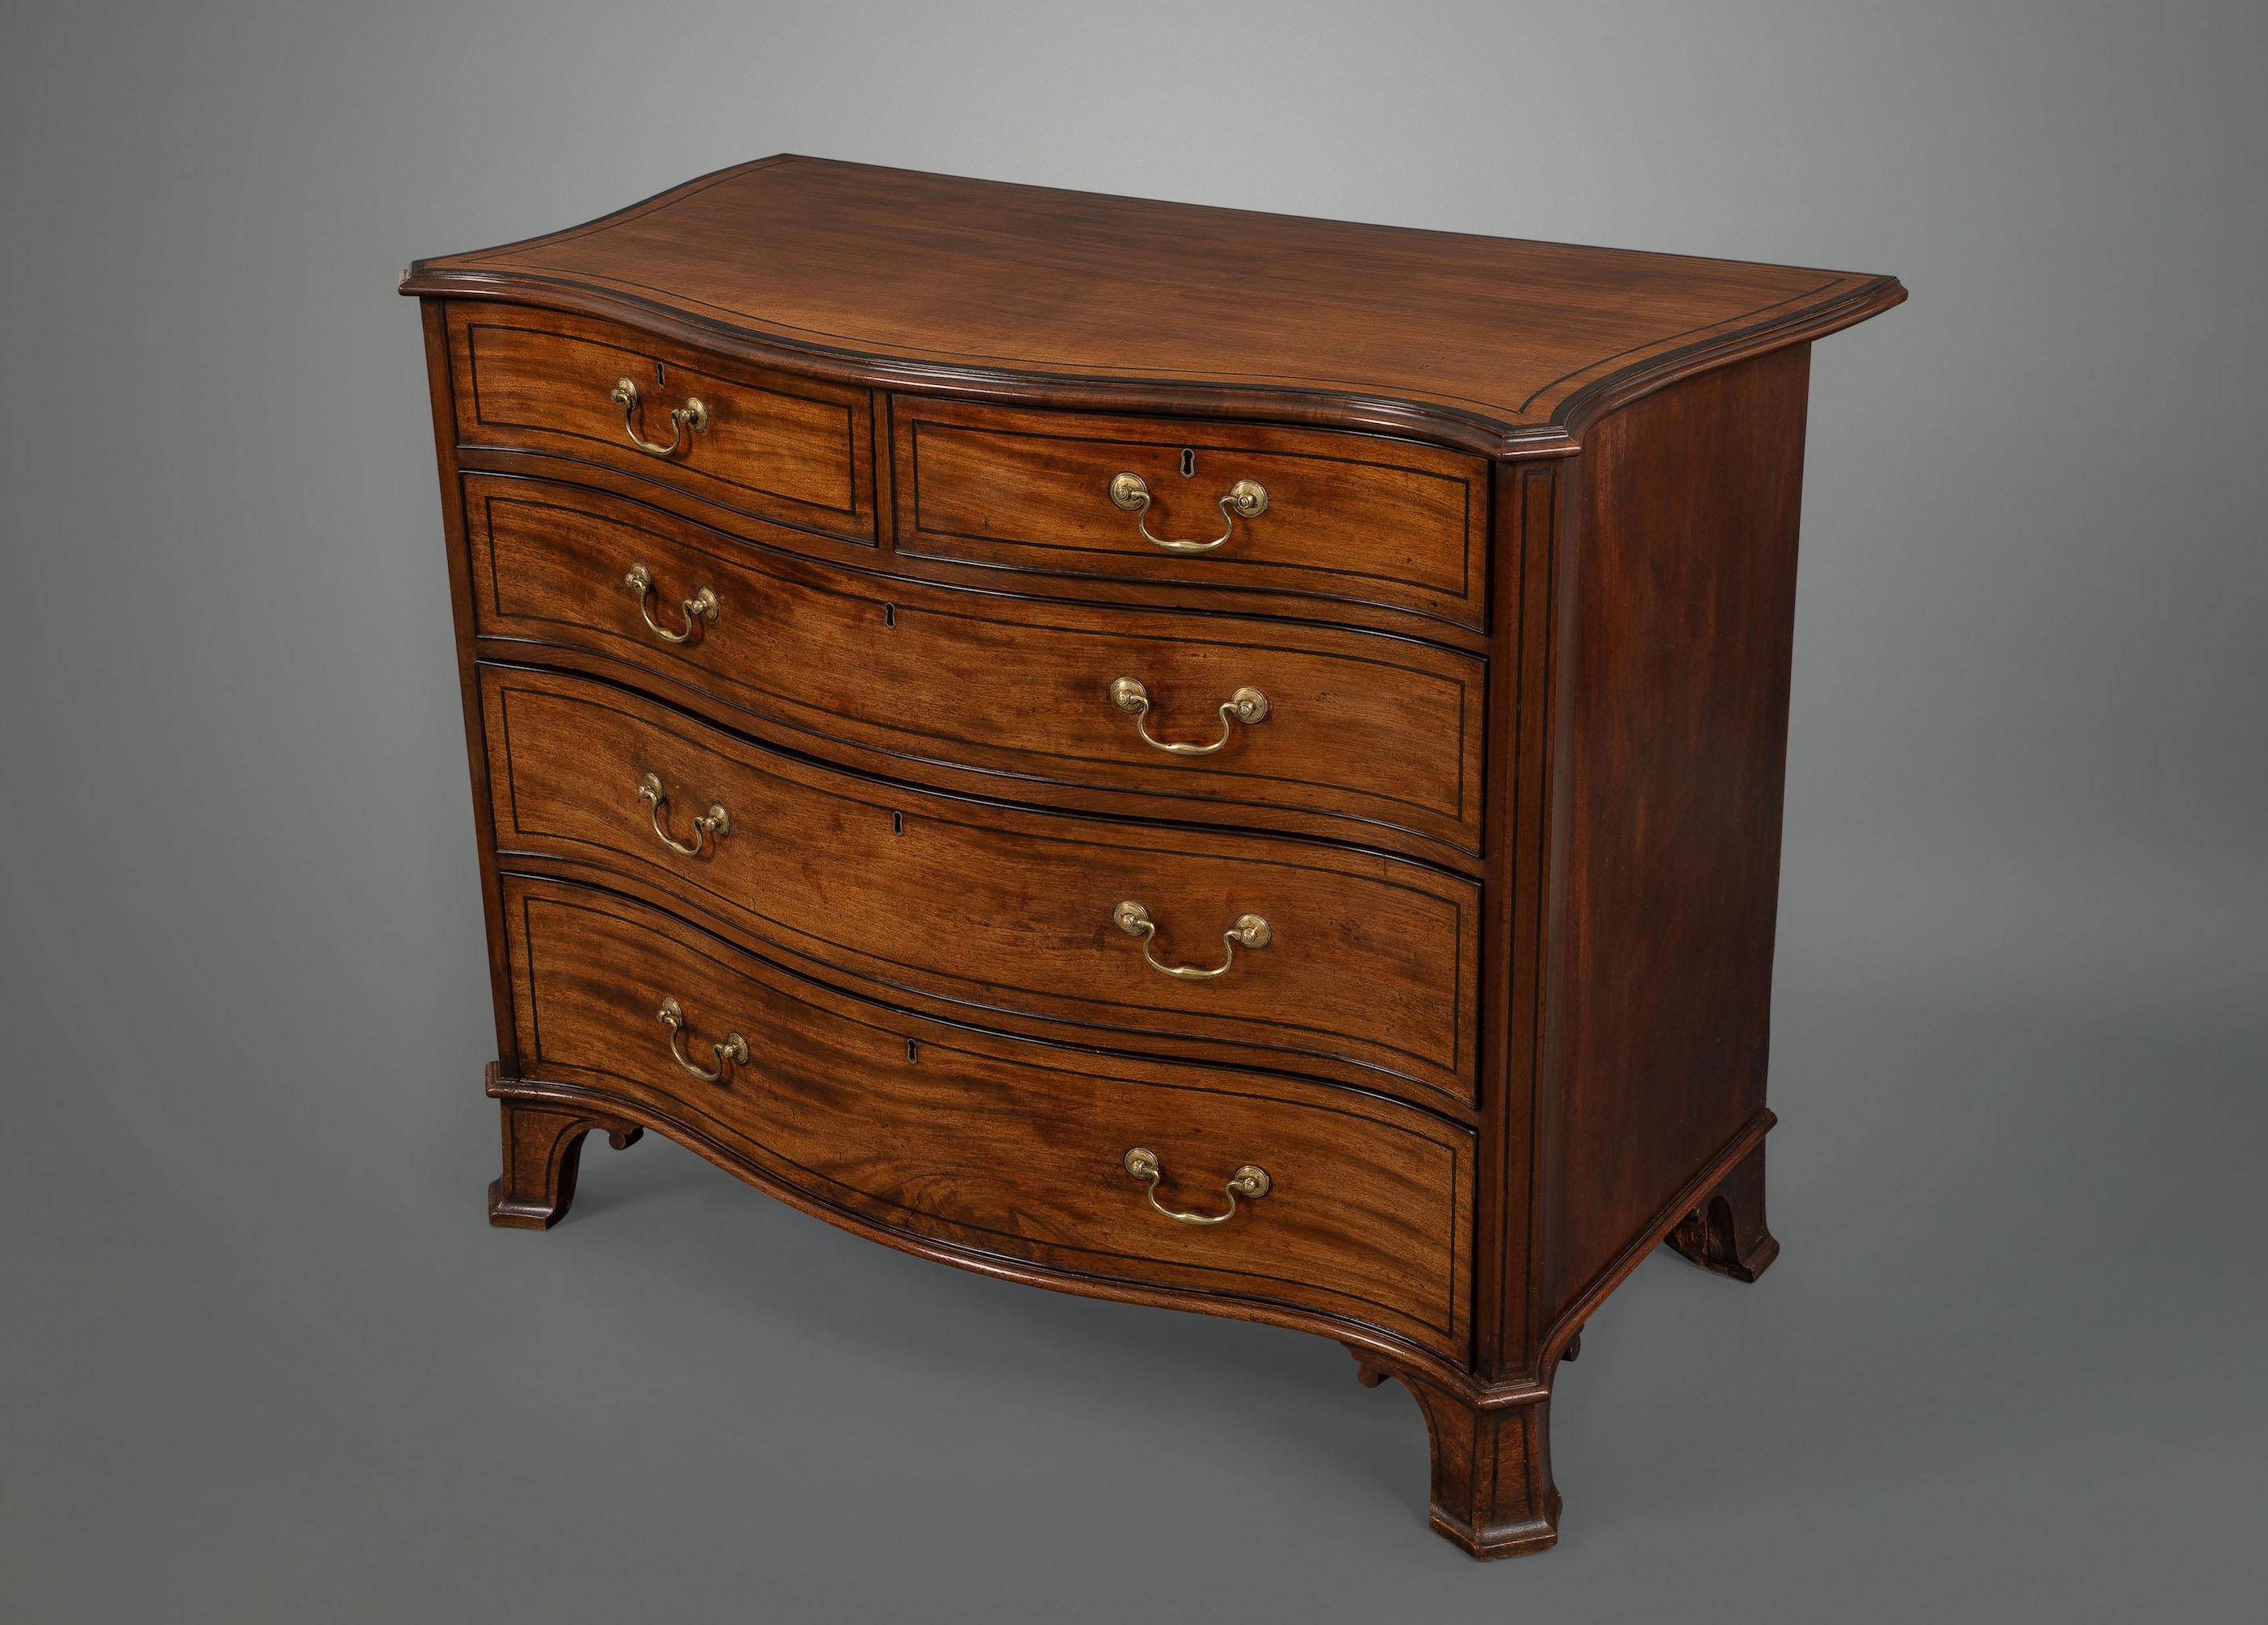 A very fine quality English George III period serpentine fronted chest of drawers executed in selected faded sabicu wood, the shaped sides being in mahogany, the drawers, top and feet being inlaid with ebony, the drawers retaining all the original